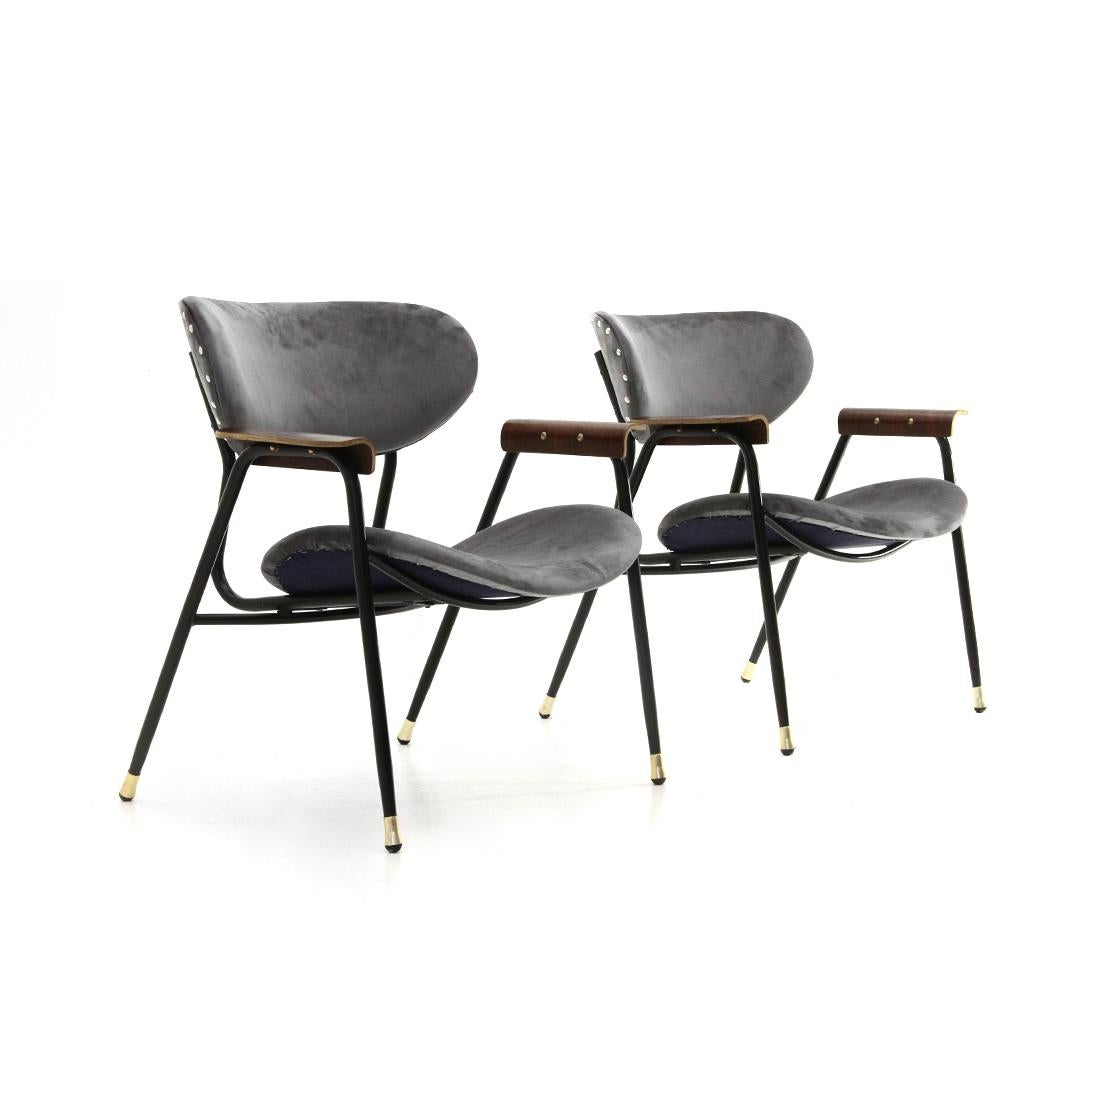 Pair of Italian-made armchairs produced in the 1950s.
Structure in curved and black painted metal tubing.
Seat and back in curved plywood padded and lined with new velvet fabric.
Armrests in curved plywood.
Feet in brass-plated aluminum and